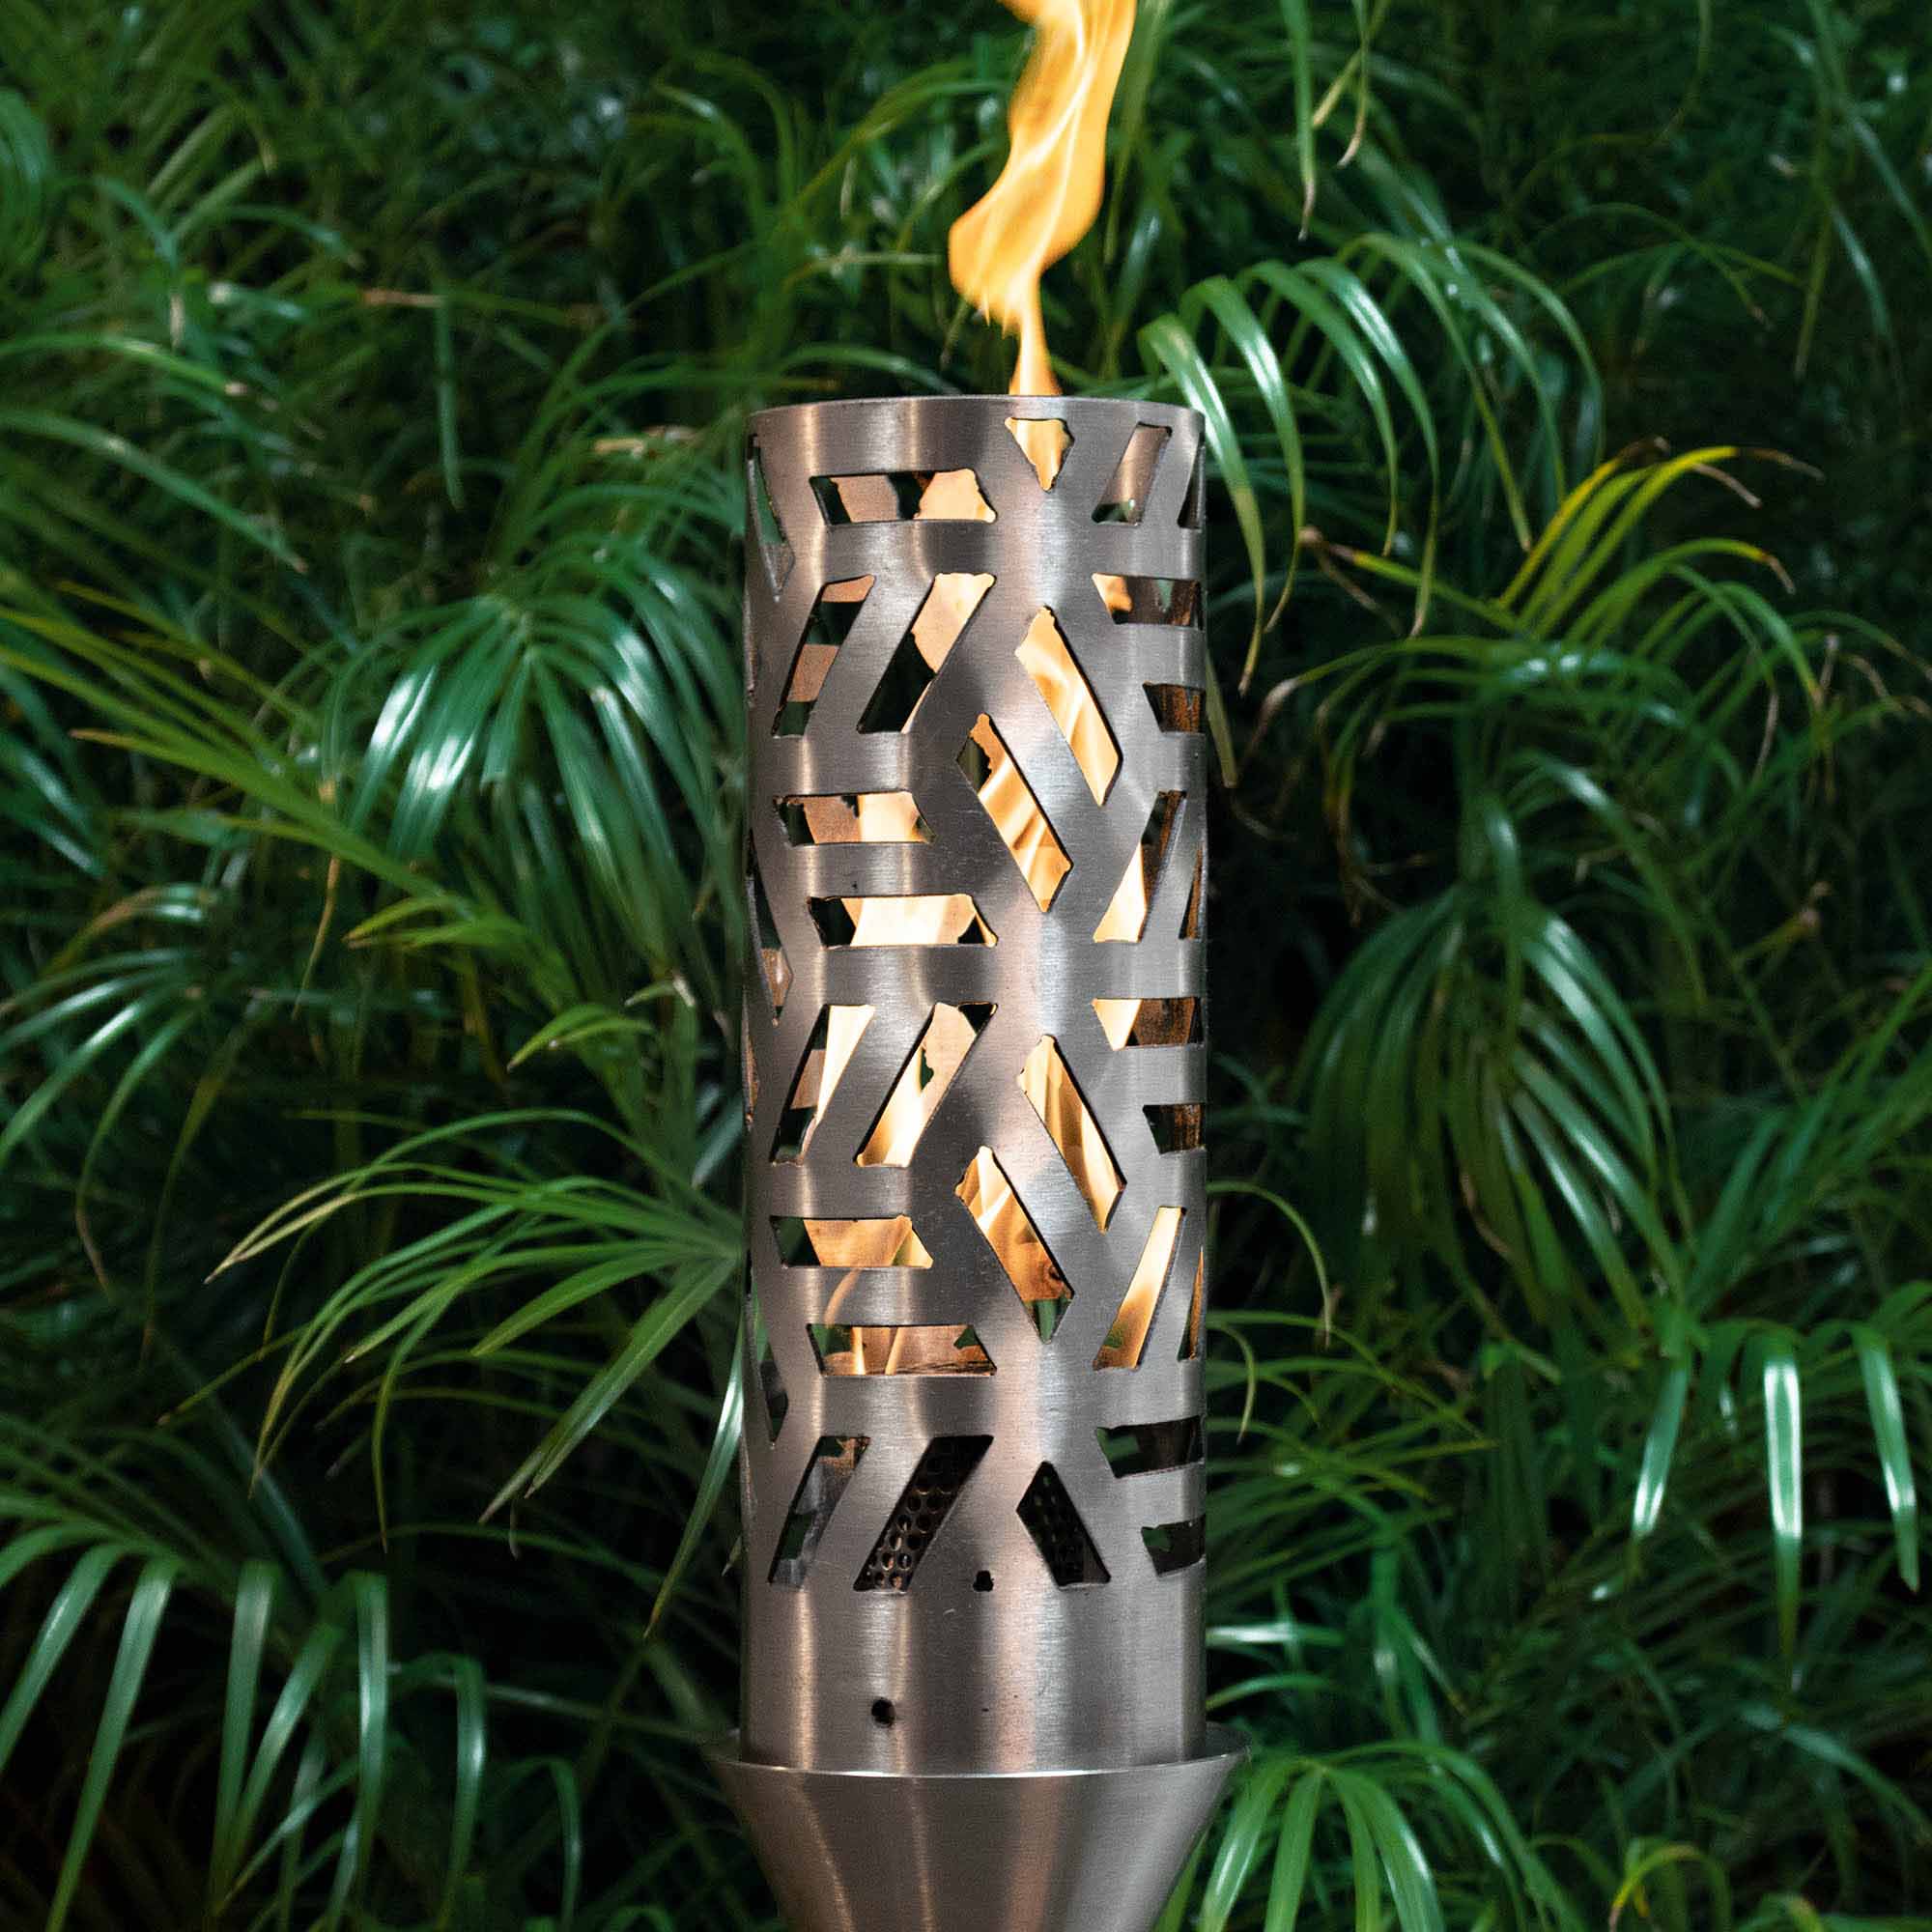 The Outdoor Plus 14" Cubist Stainless Steel Fire Torch Complete Set